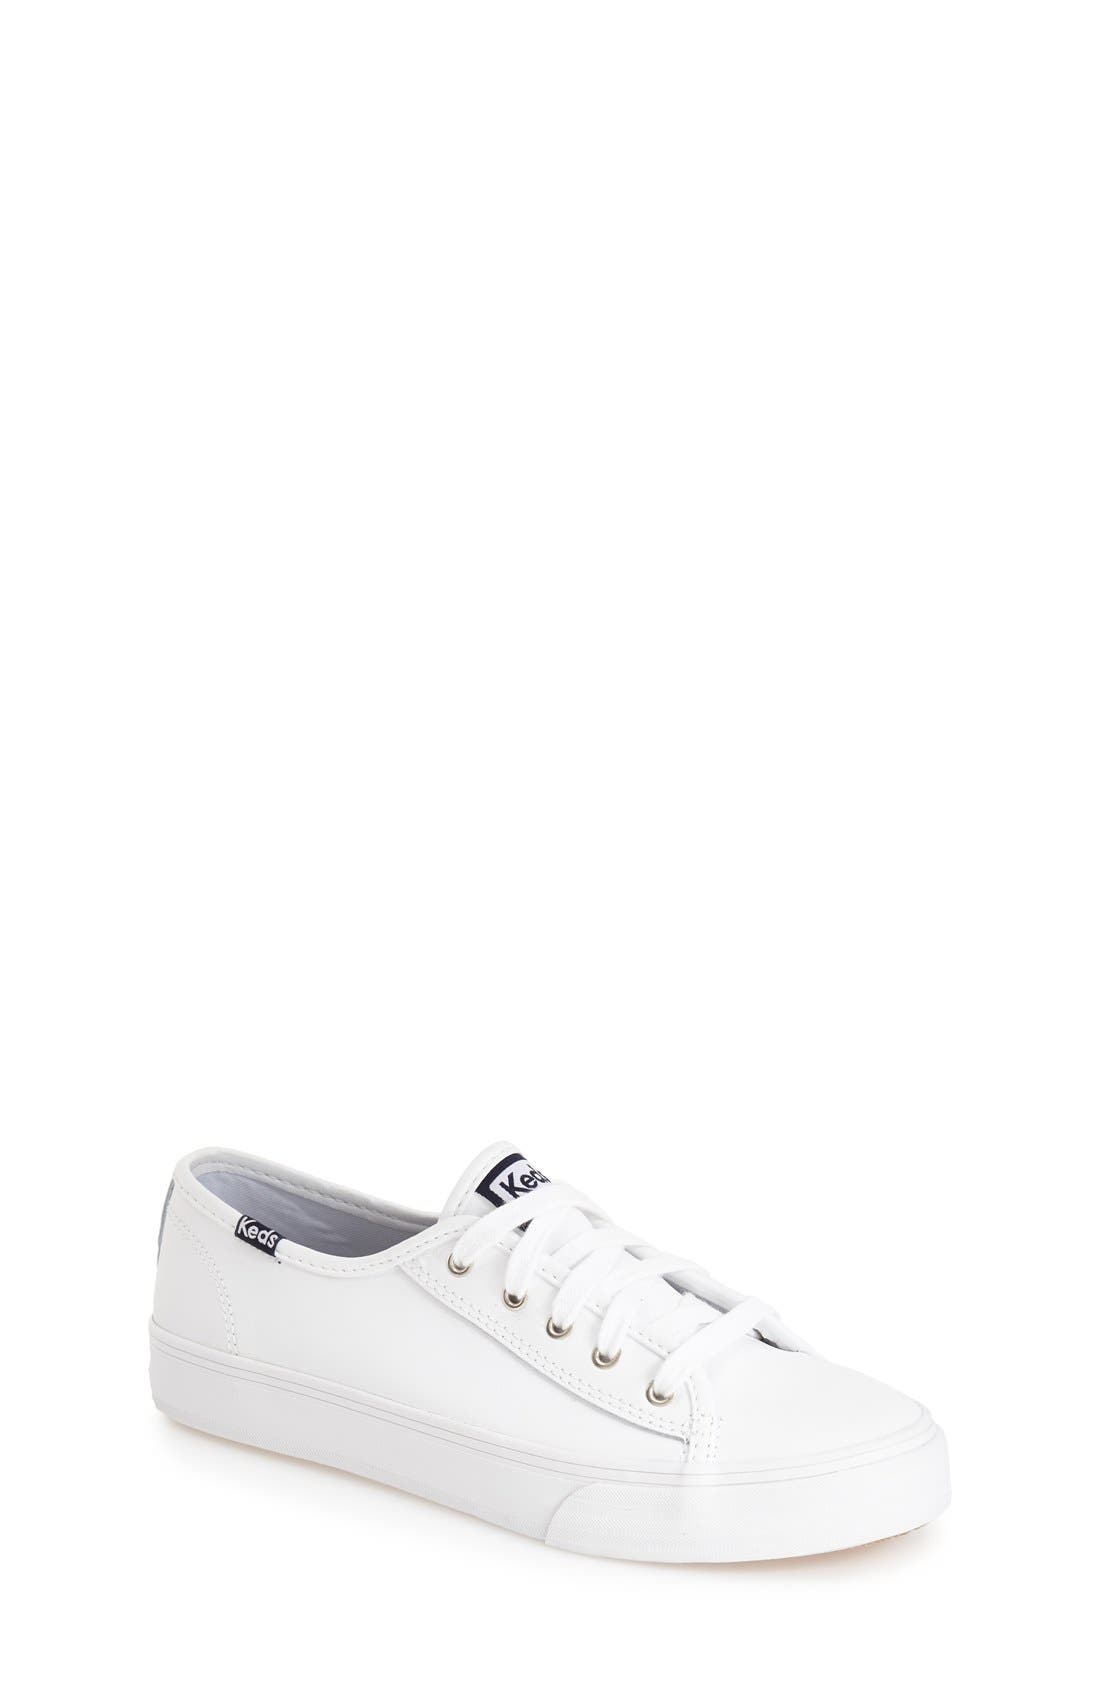 keds double up sneaker